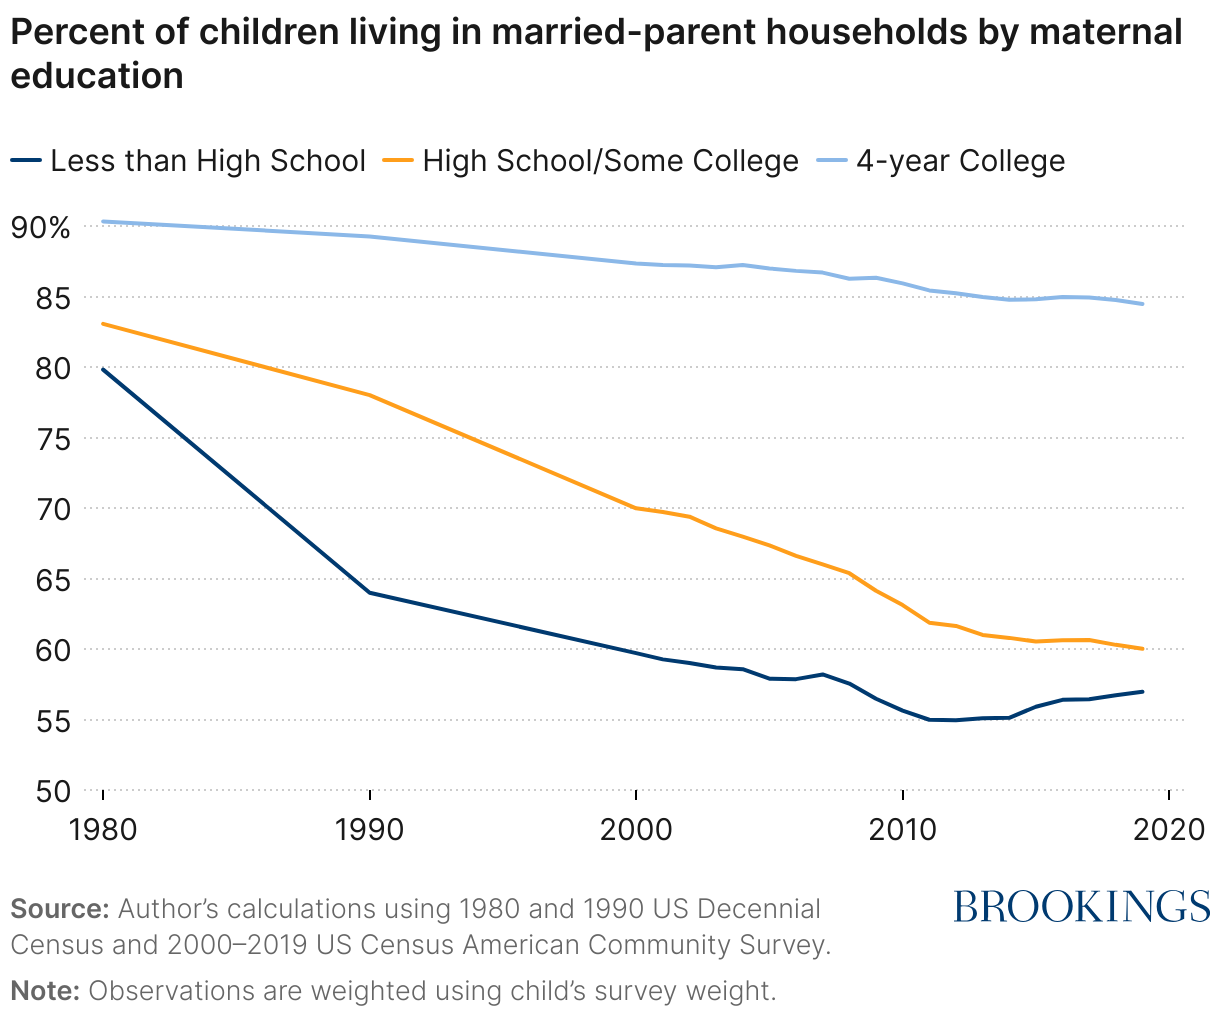 The percent of children living in married-parent households has declined steeply for children of moterhs with less than a bachelor's degree. 